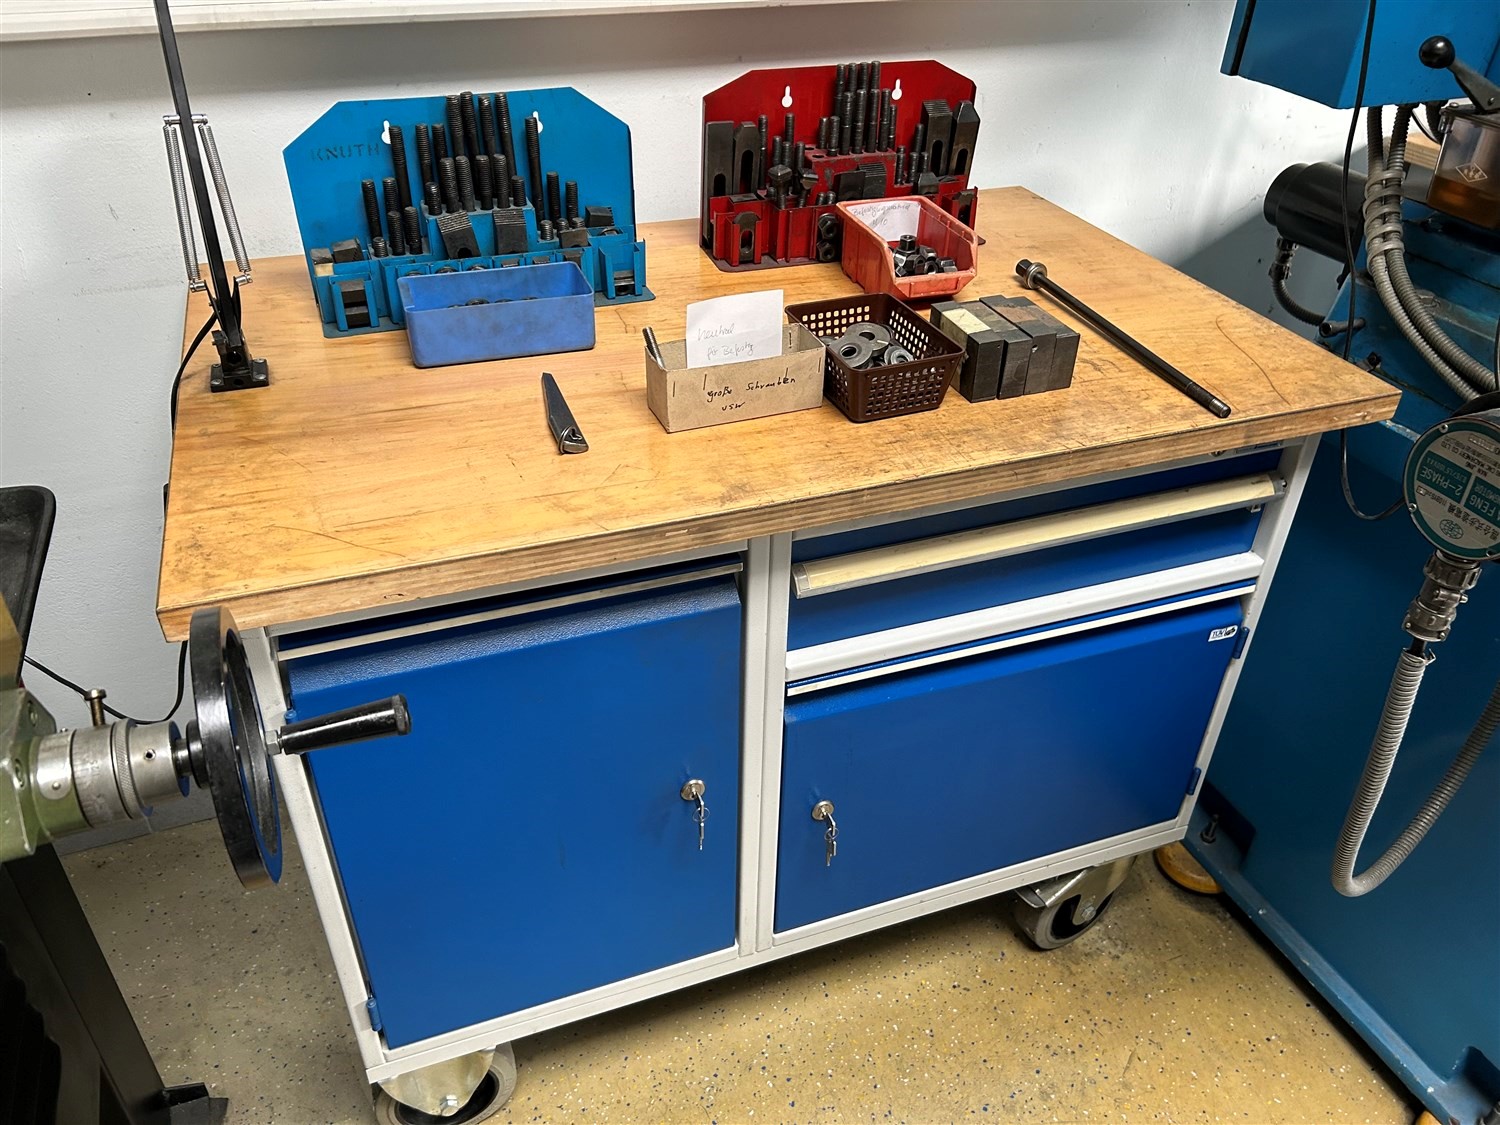 Mobile workbench Garant Kompakt with contents